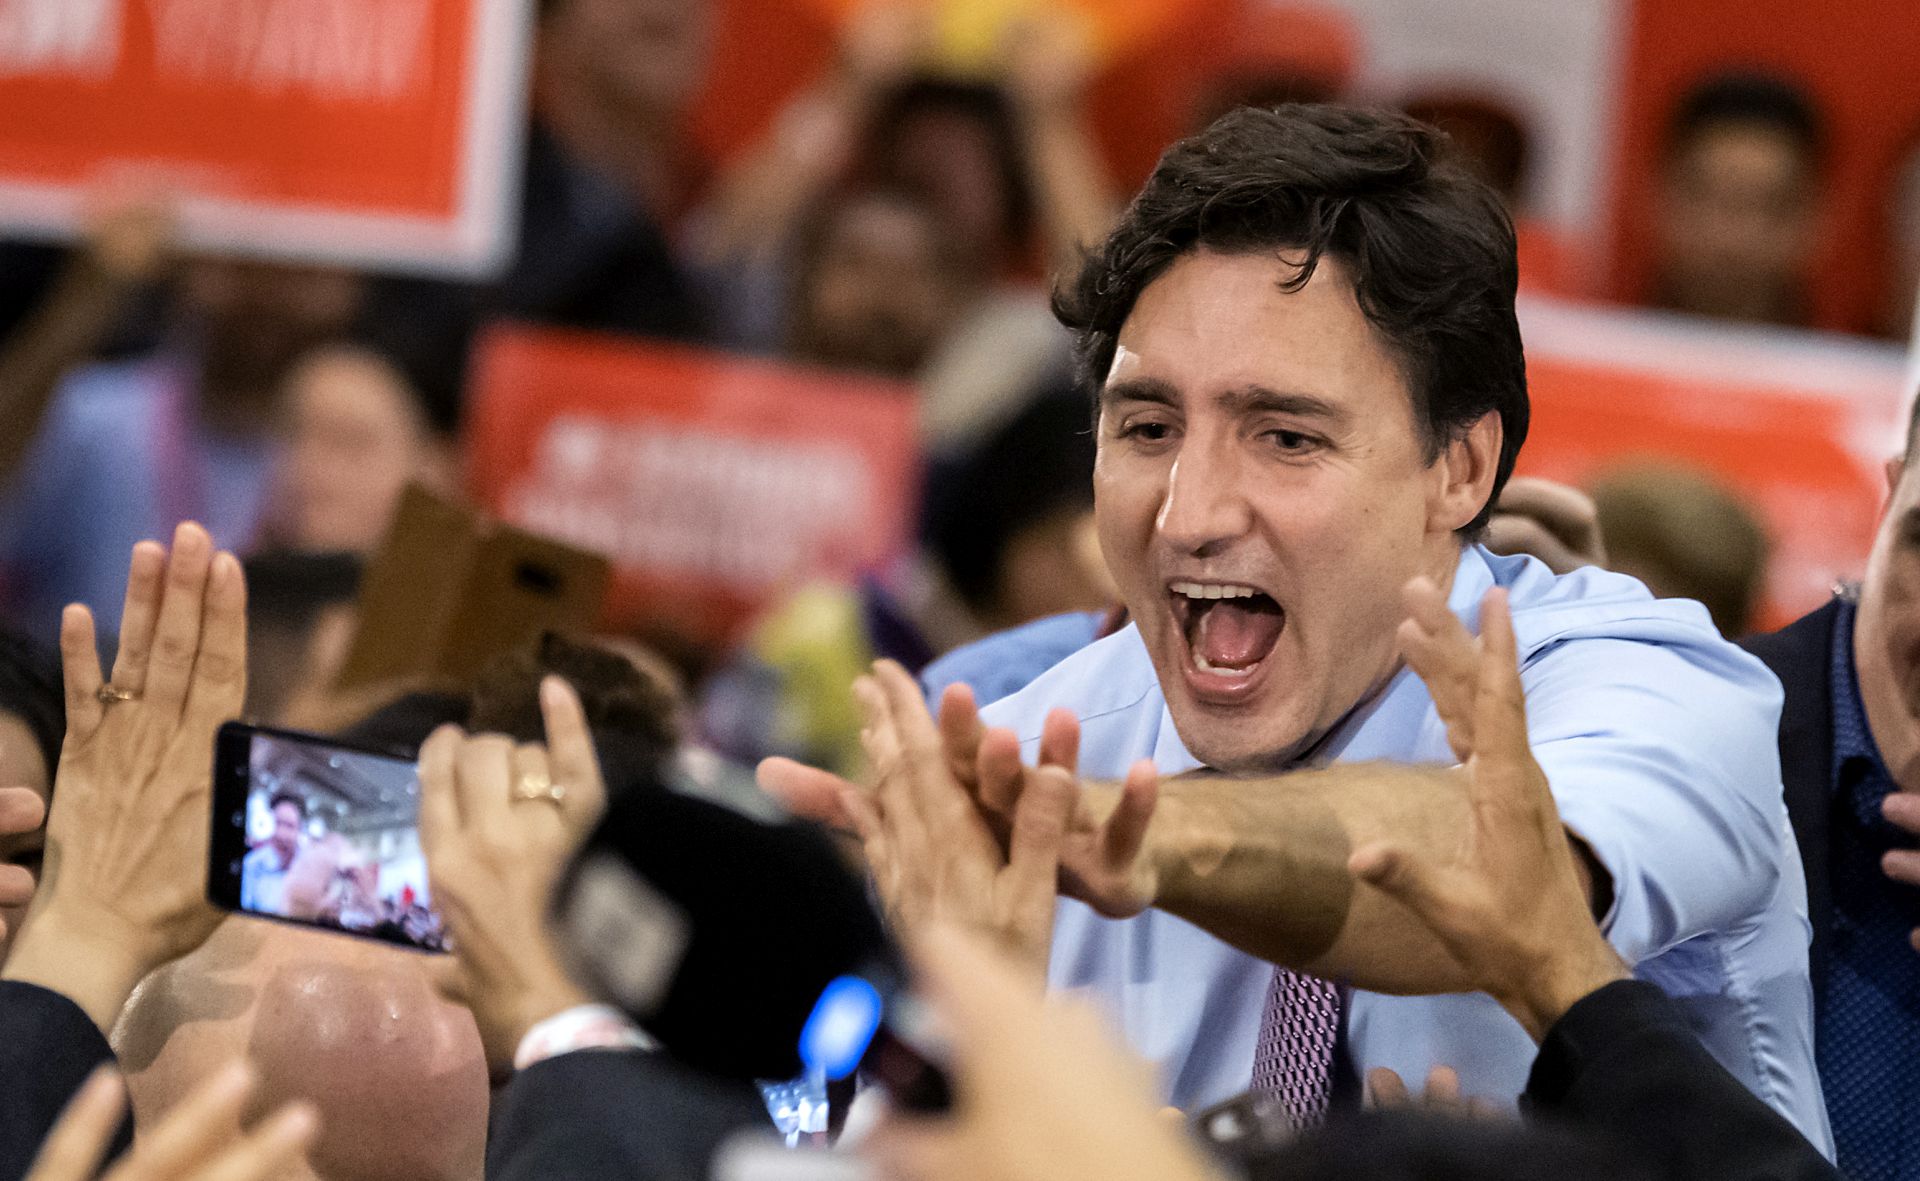 epa07931891 Canadian Prime Minister and Liberal Party leader Justin Trudeau greets supporters at a campaign rally in Vaughn, Ontario, Canada, 18 October 2019. Canadians will vote in the country's 43rd federal election on 21 October 2019.  EPA/WARREN TODA